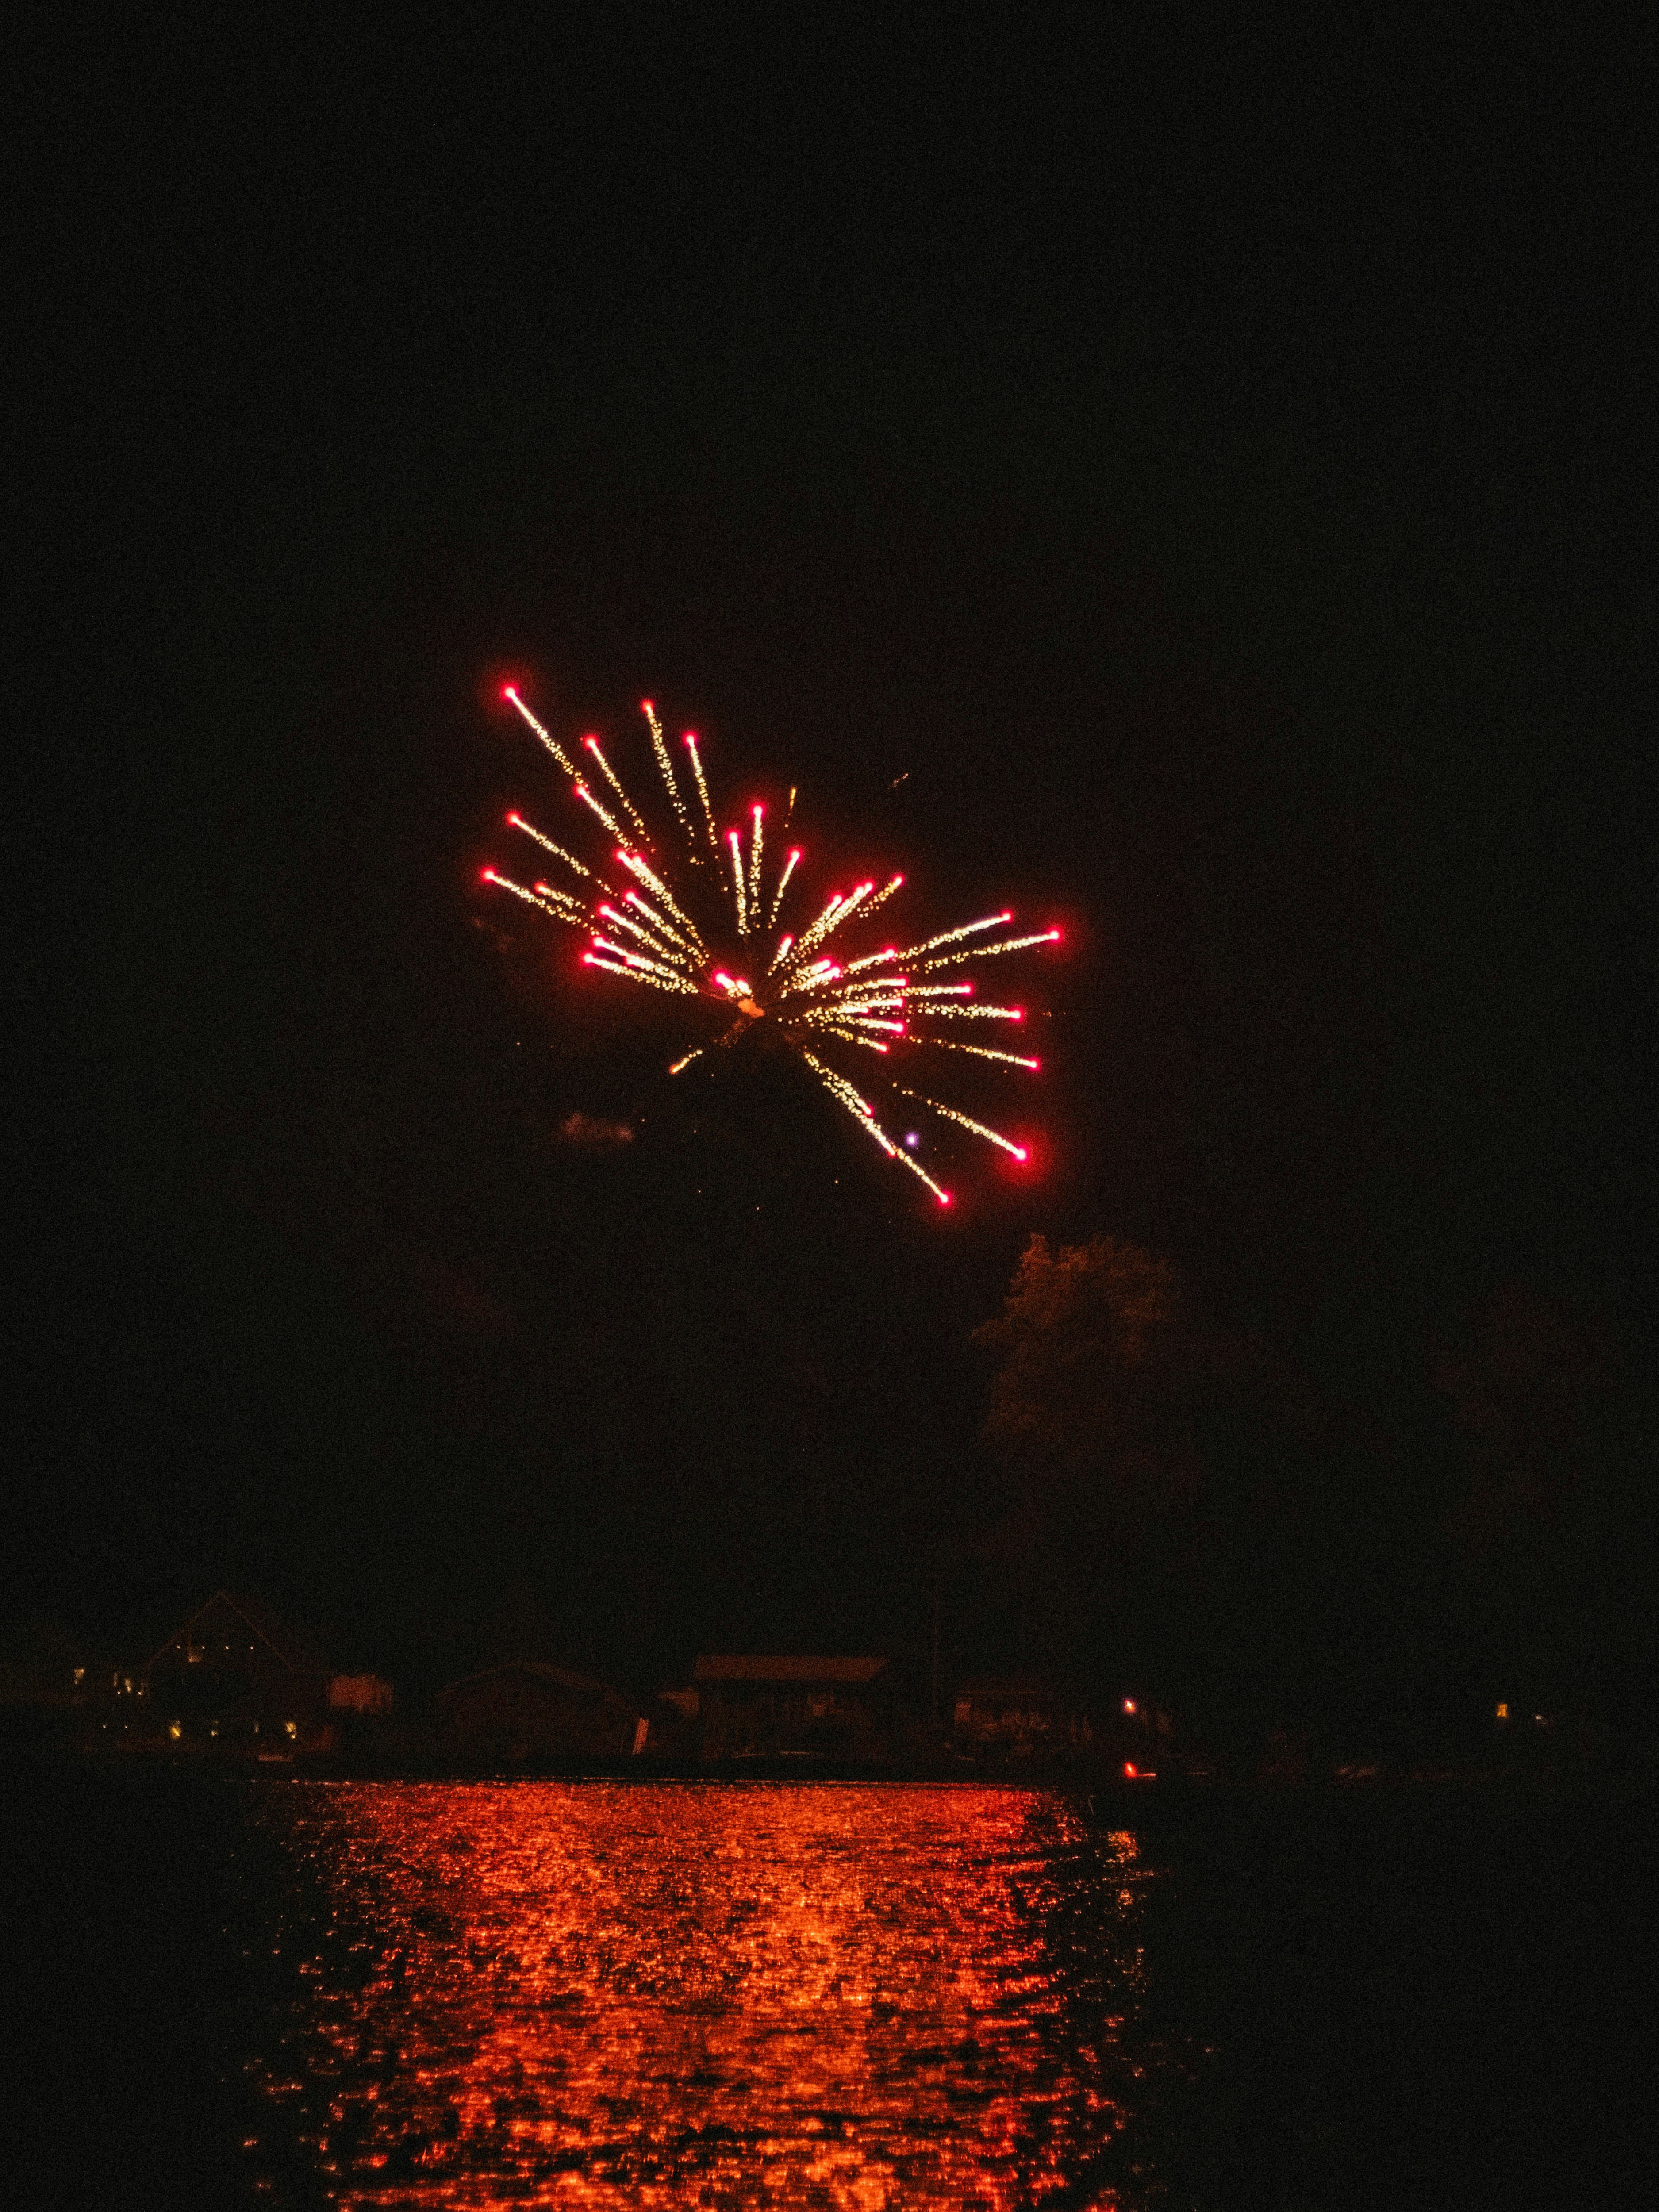 fireworks display over body of water during night time